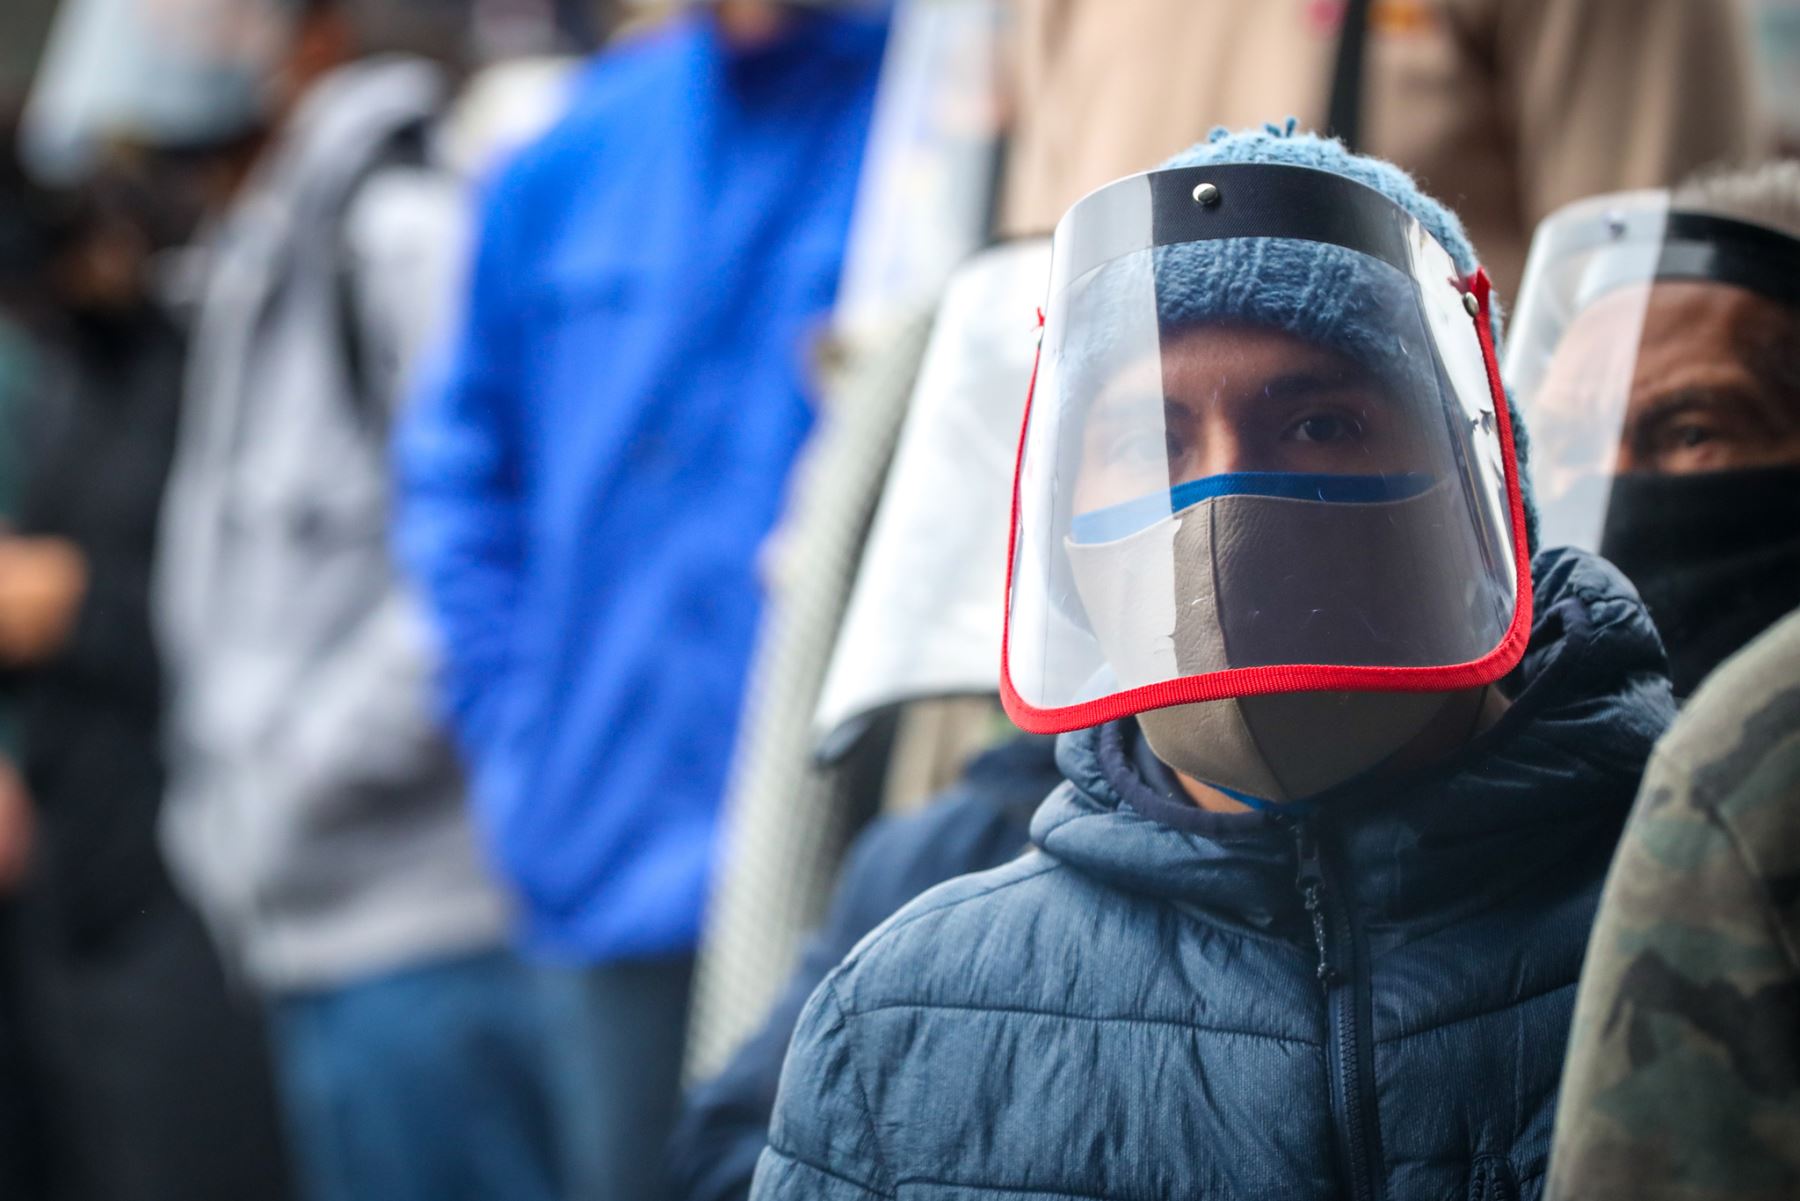 In the current situation dominated by the coronavirus pandemic, face shields have become a necessary accessory to reduce the risk of contagion from COVID-19. Photo: ANDINA/Difusion